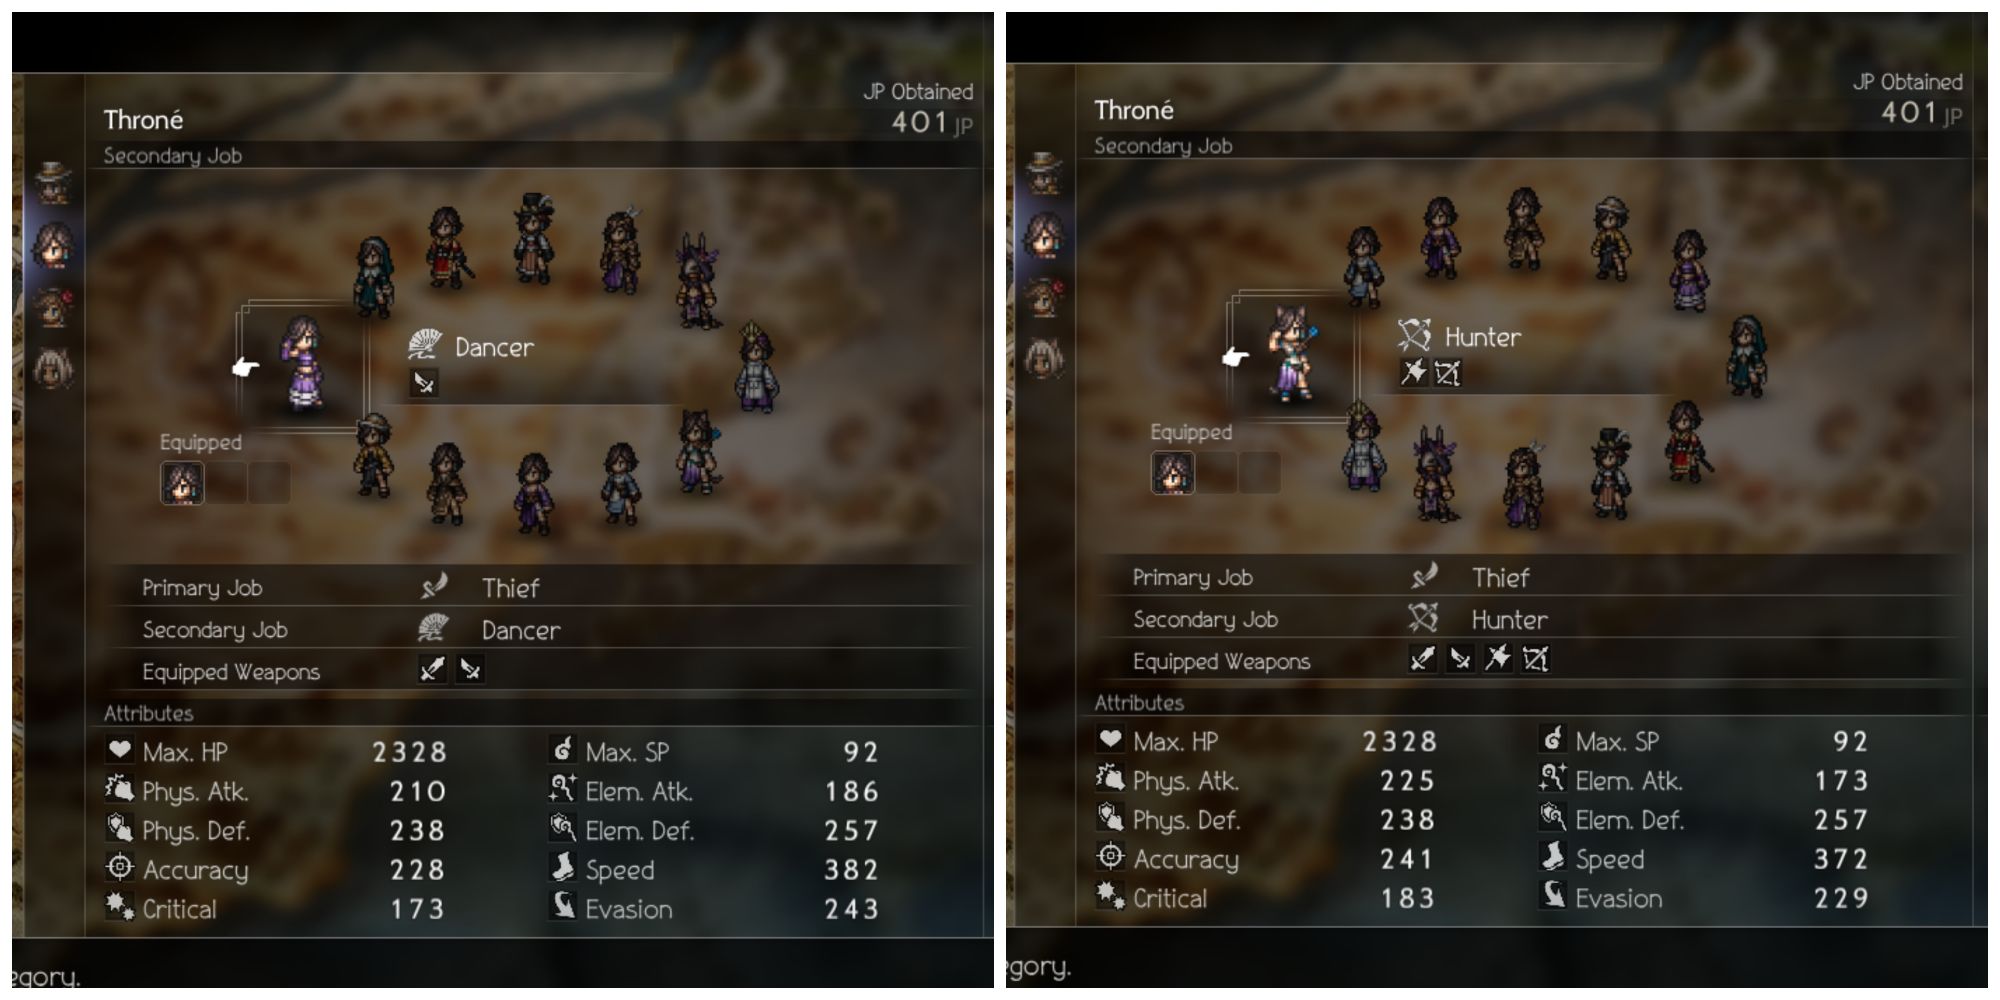 Throne Side Job Choices In Octopath Traveler 2, Dancer And Hunter